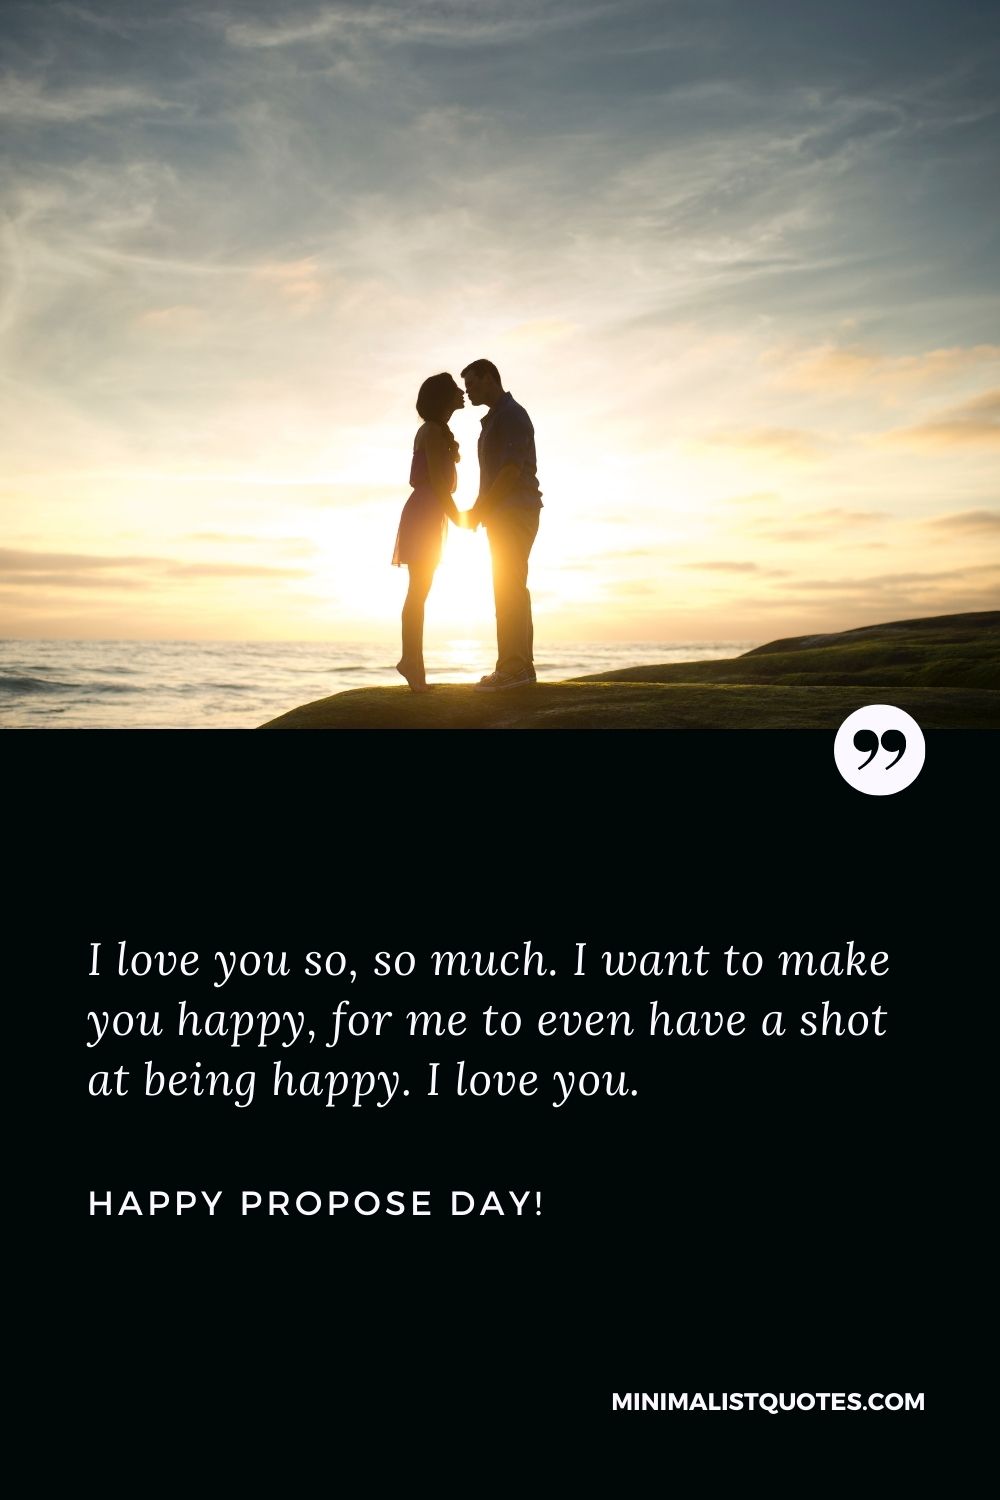 Happy Propose Day [currentyear] Images & Pics Free Download - Image Diamond